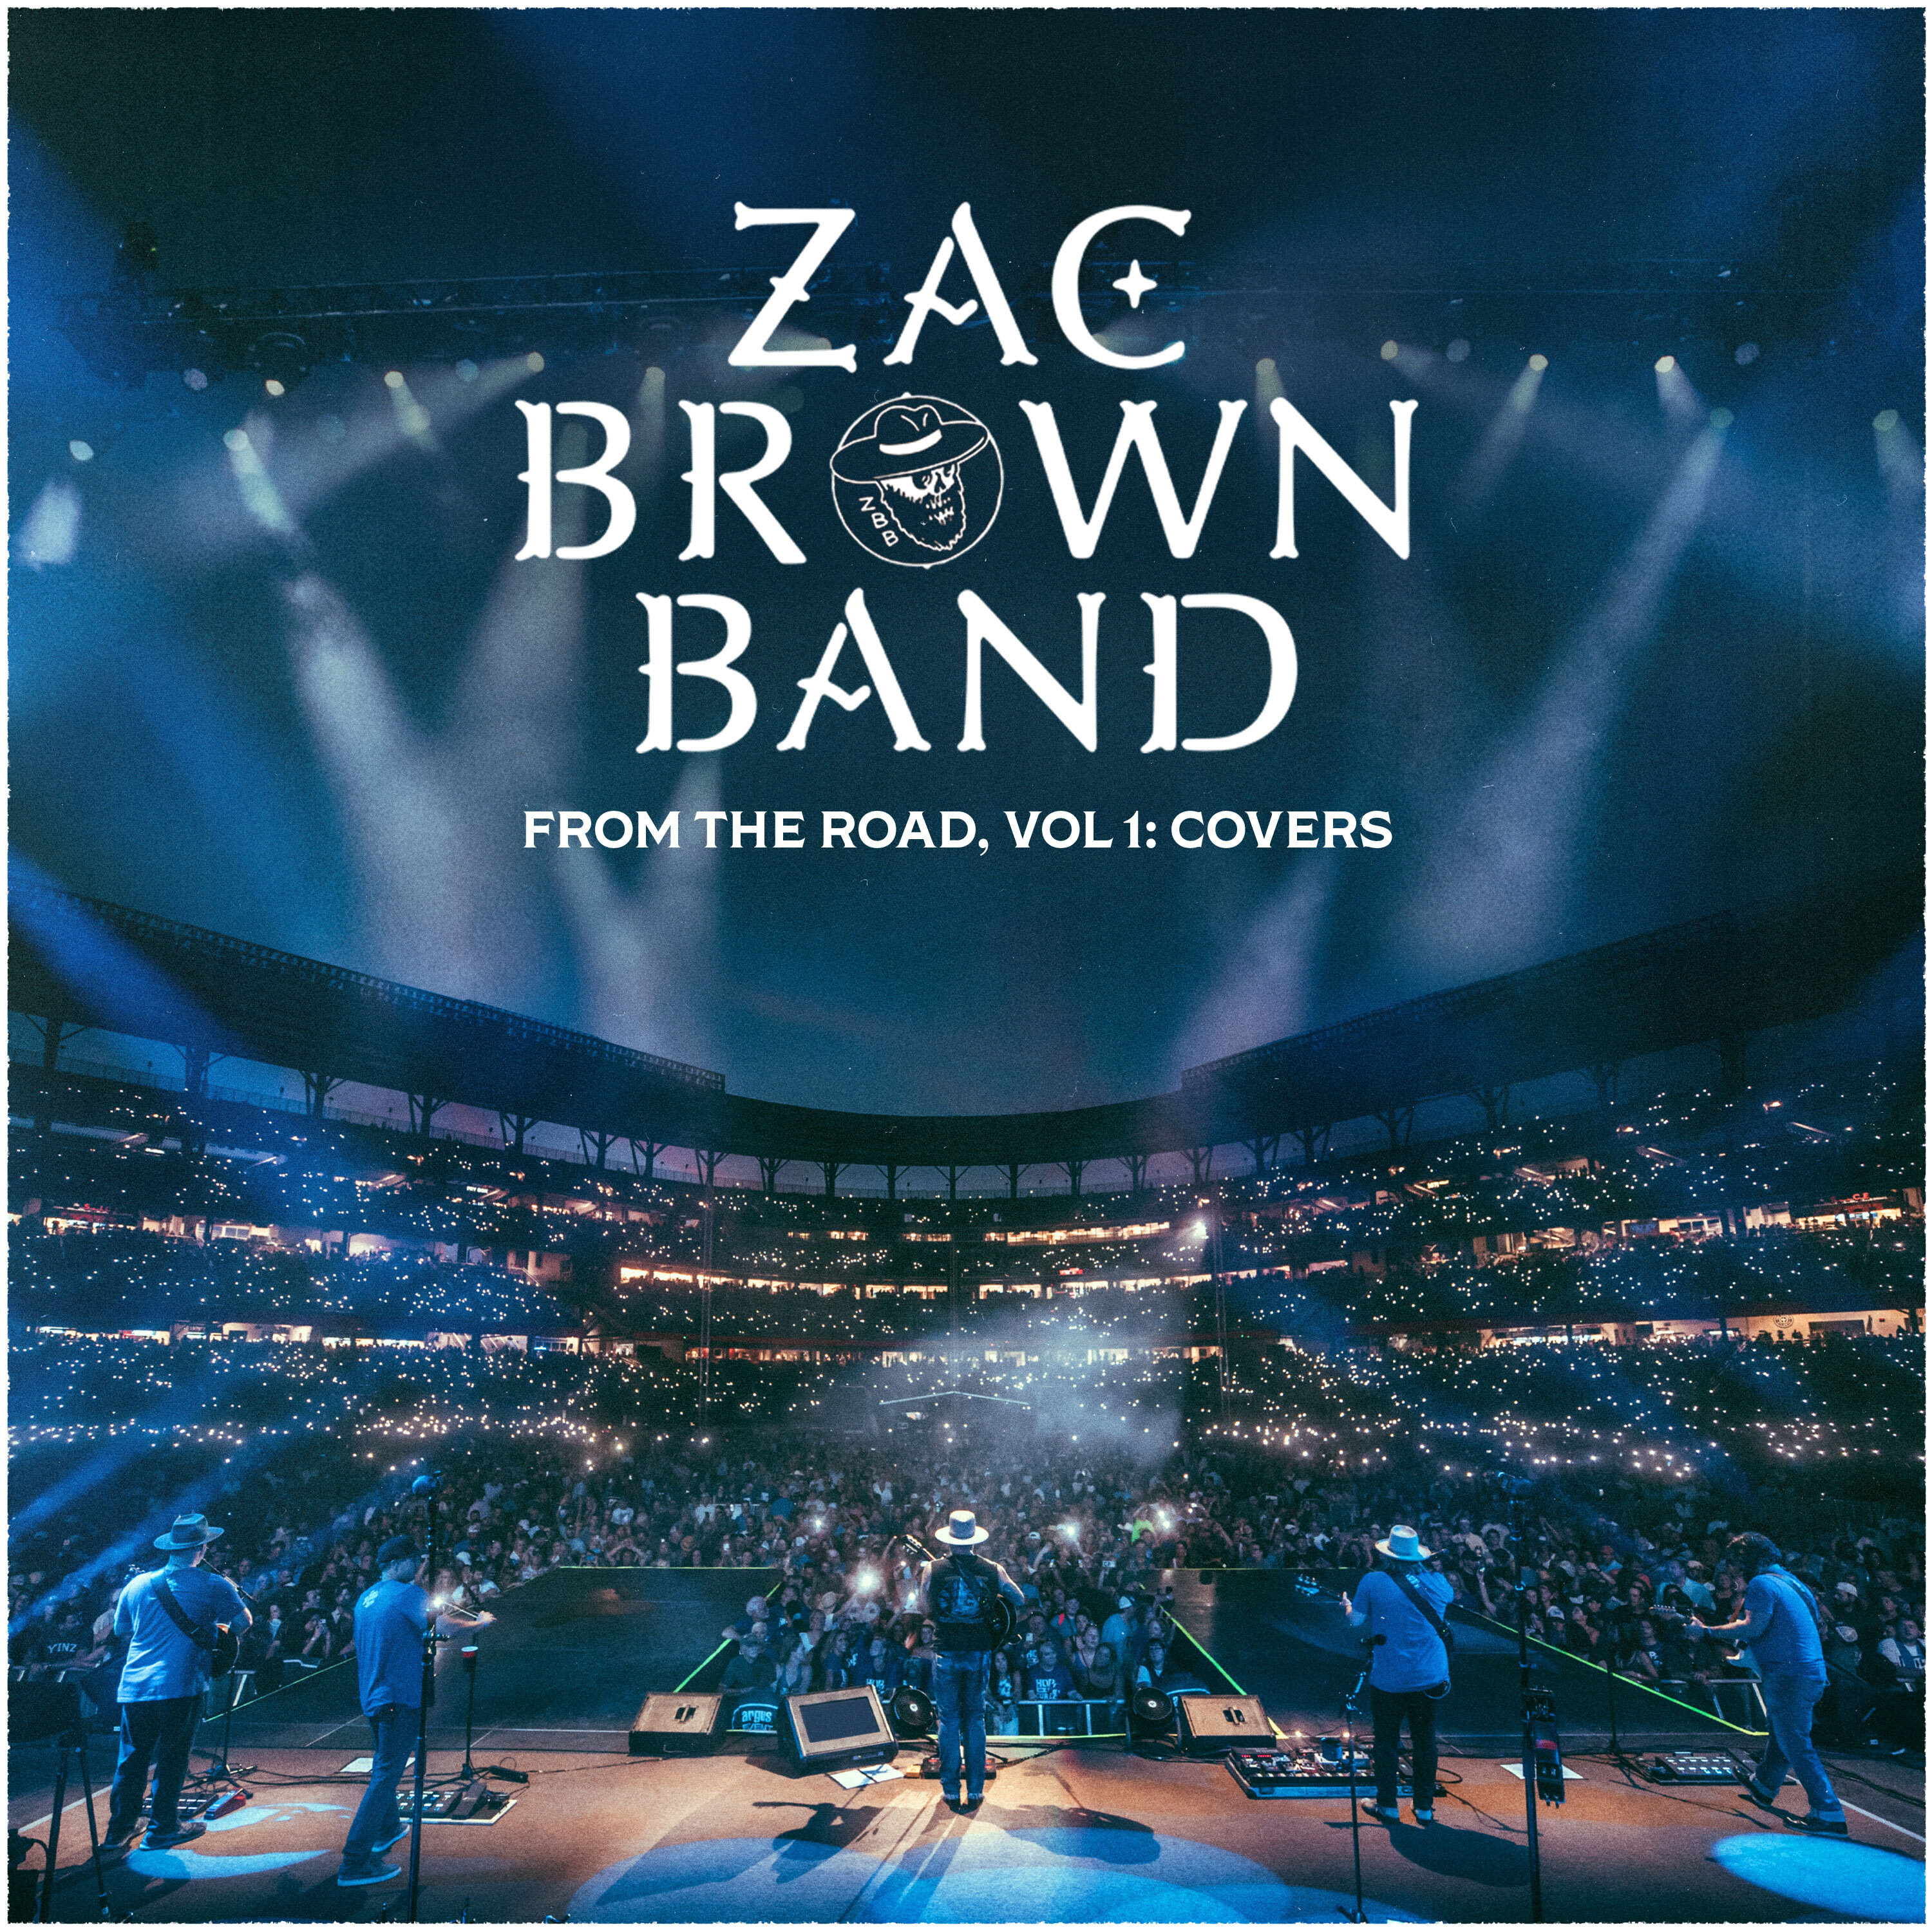 Zac Brown Band Releases Rendition of “Baba O’Riley”